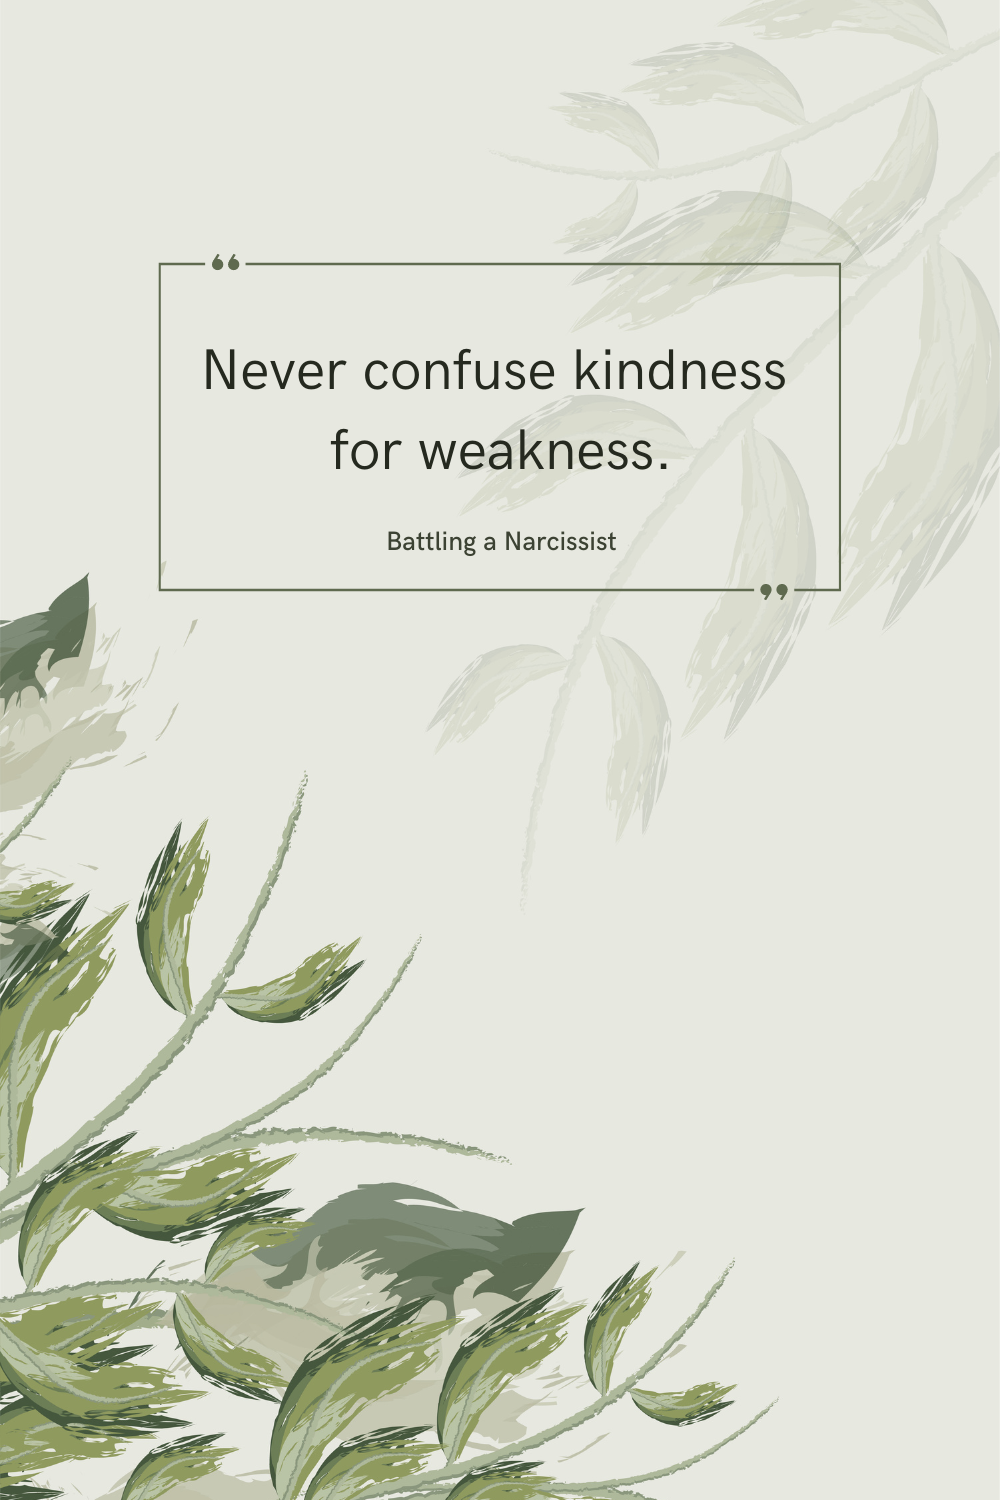 Never confuse kindness for weakness.